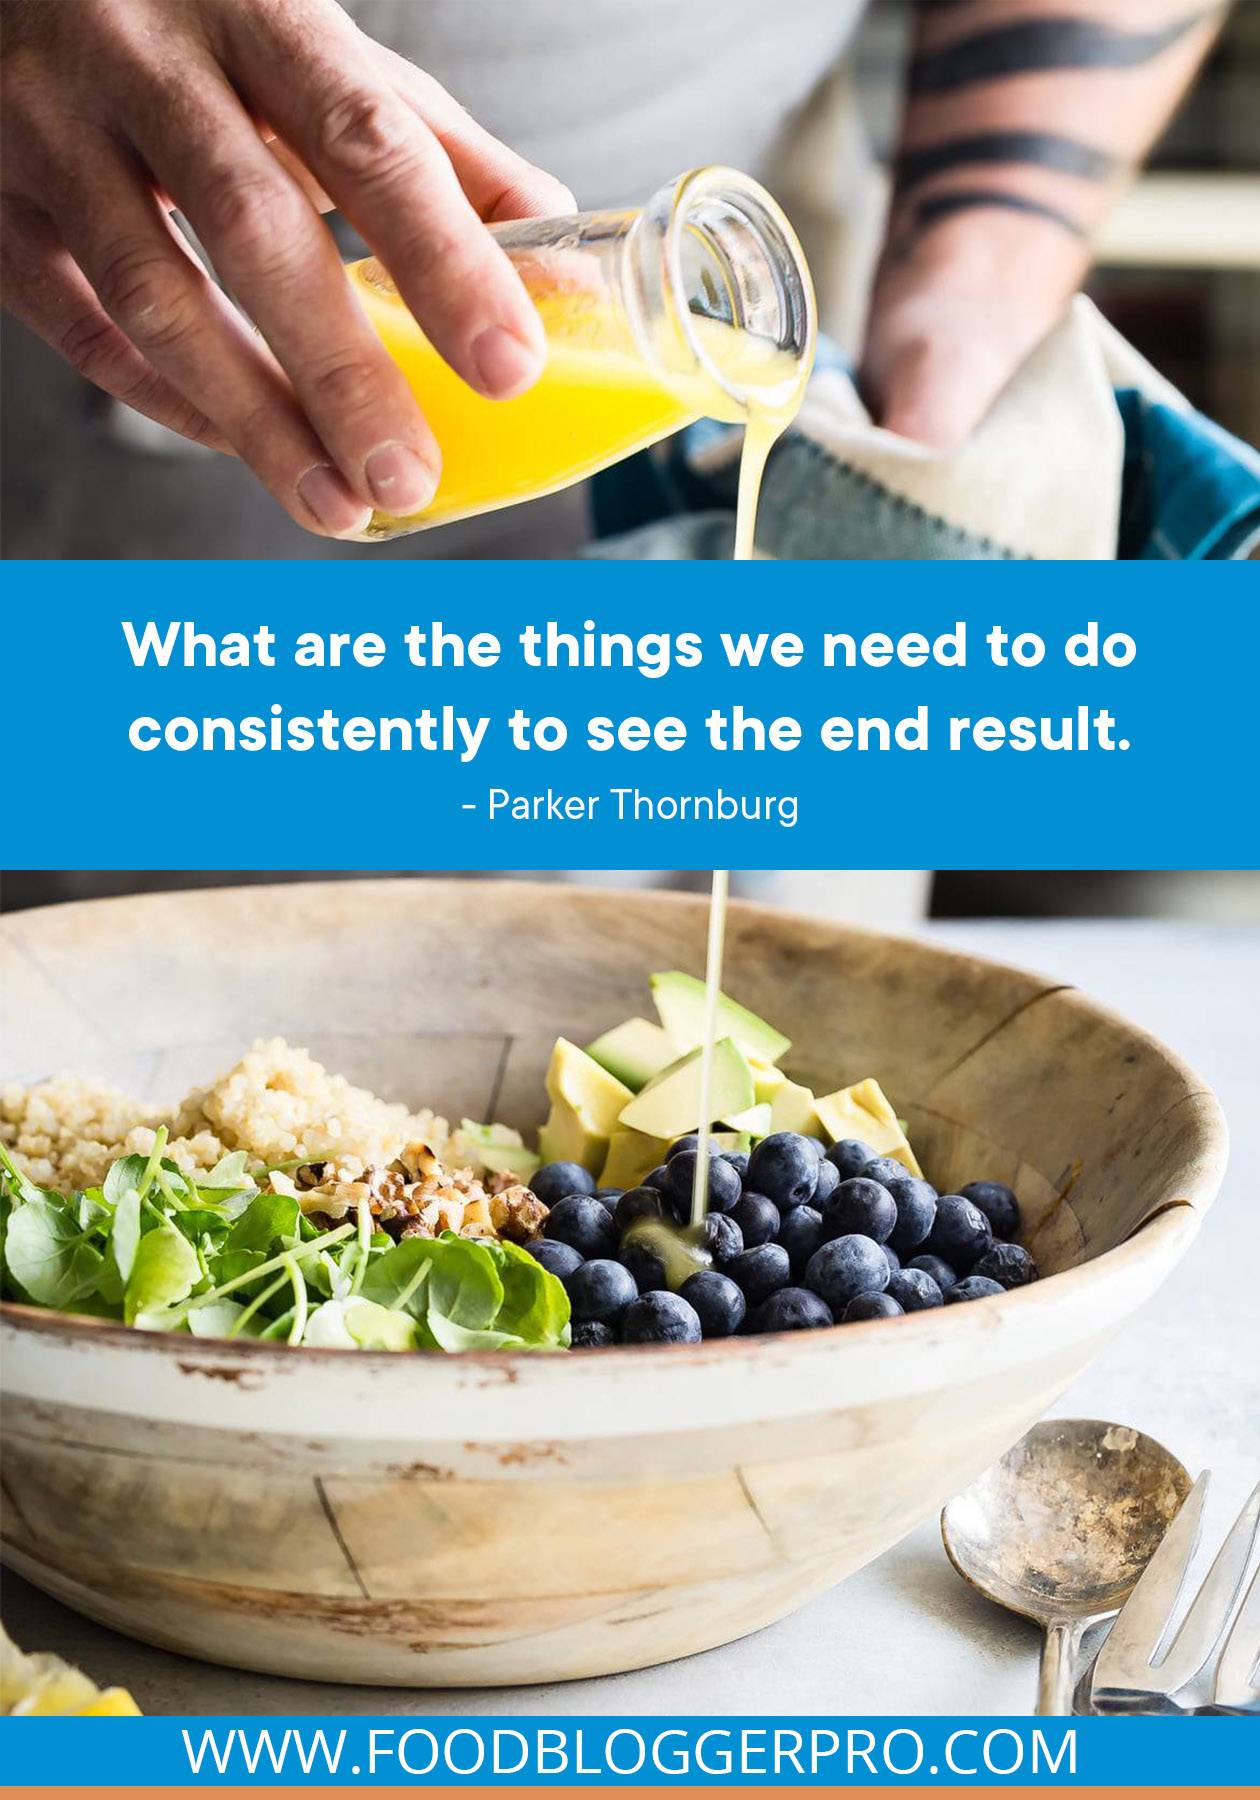 A photograph of someone pouring dressing into a salad bowl with a quote from Parker Thornburg's episode of The Food Blogger Pro Podcast that reads: "What are the things we need to do consistently to see the end result."